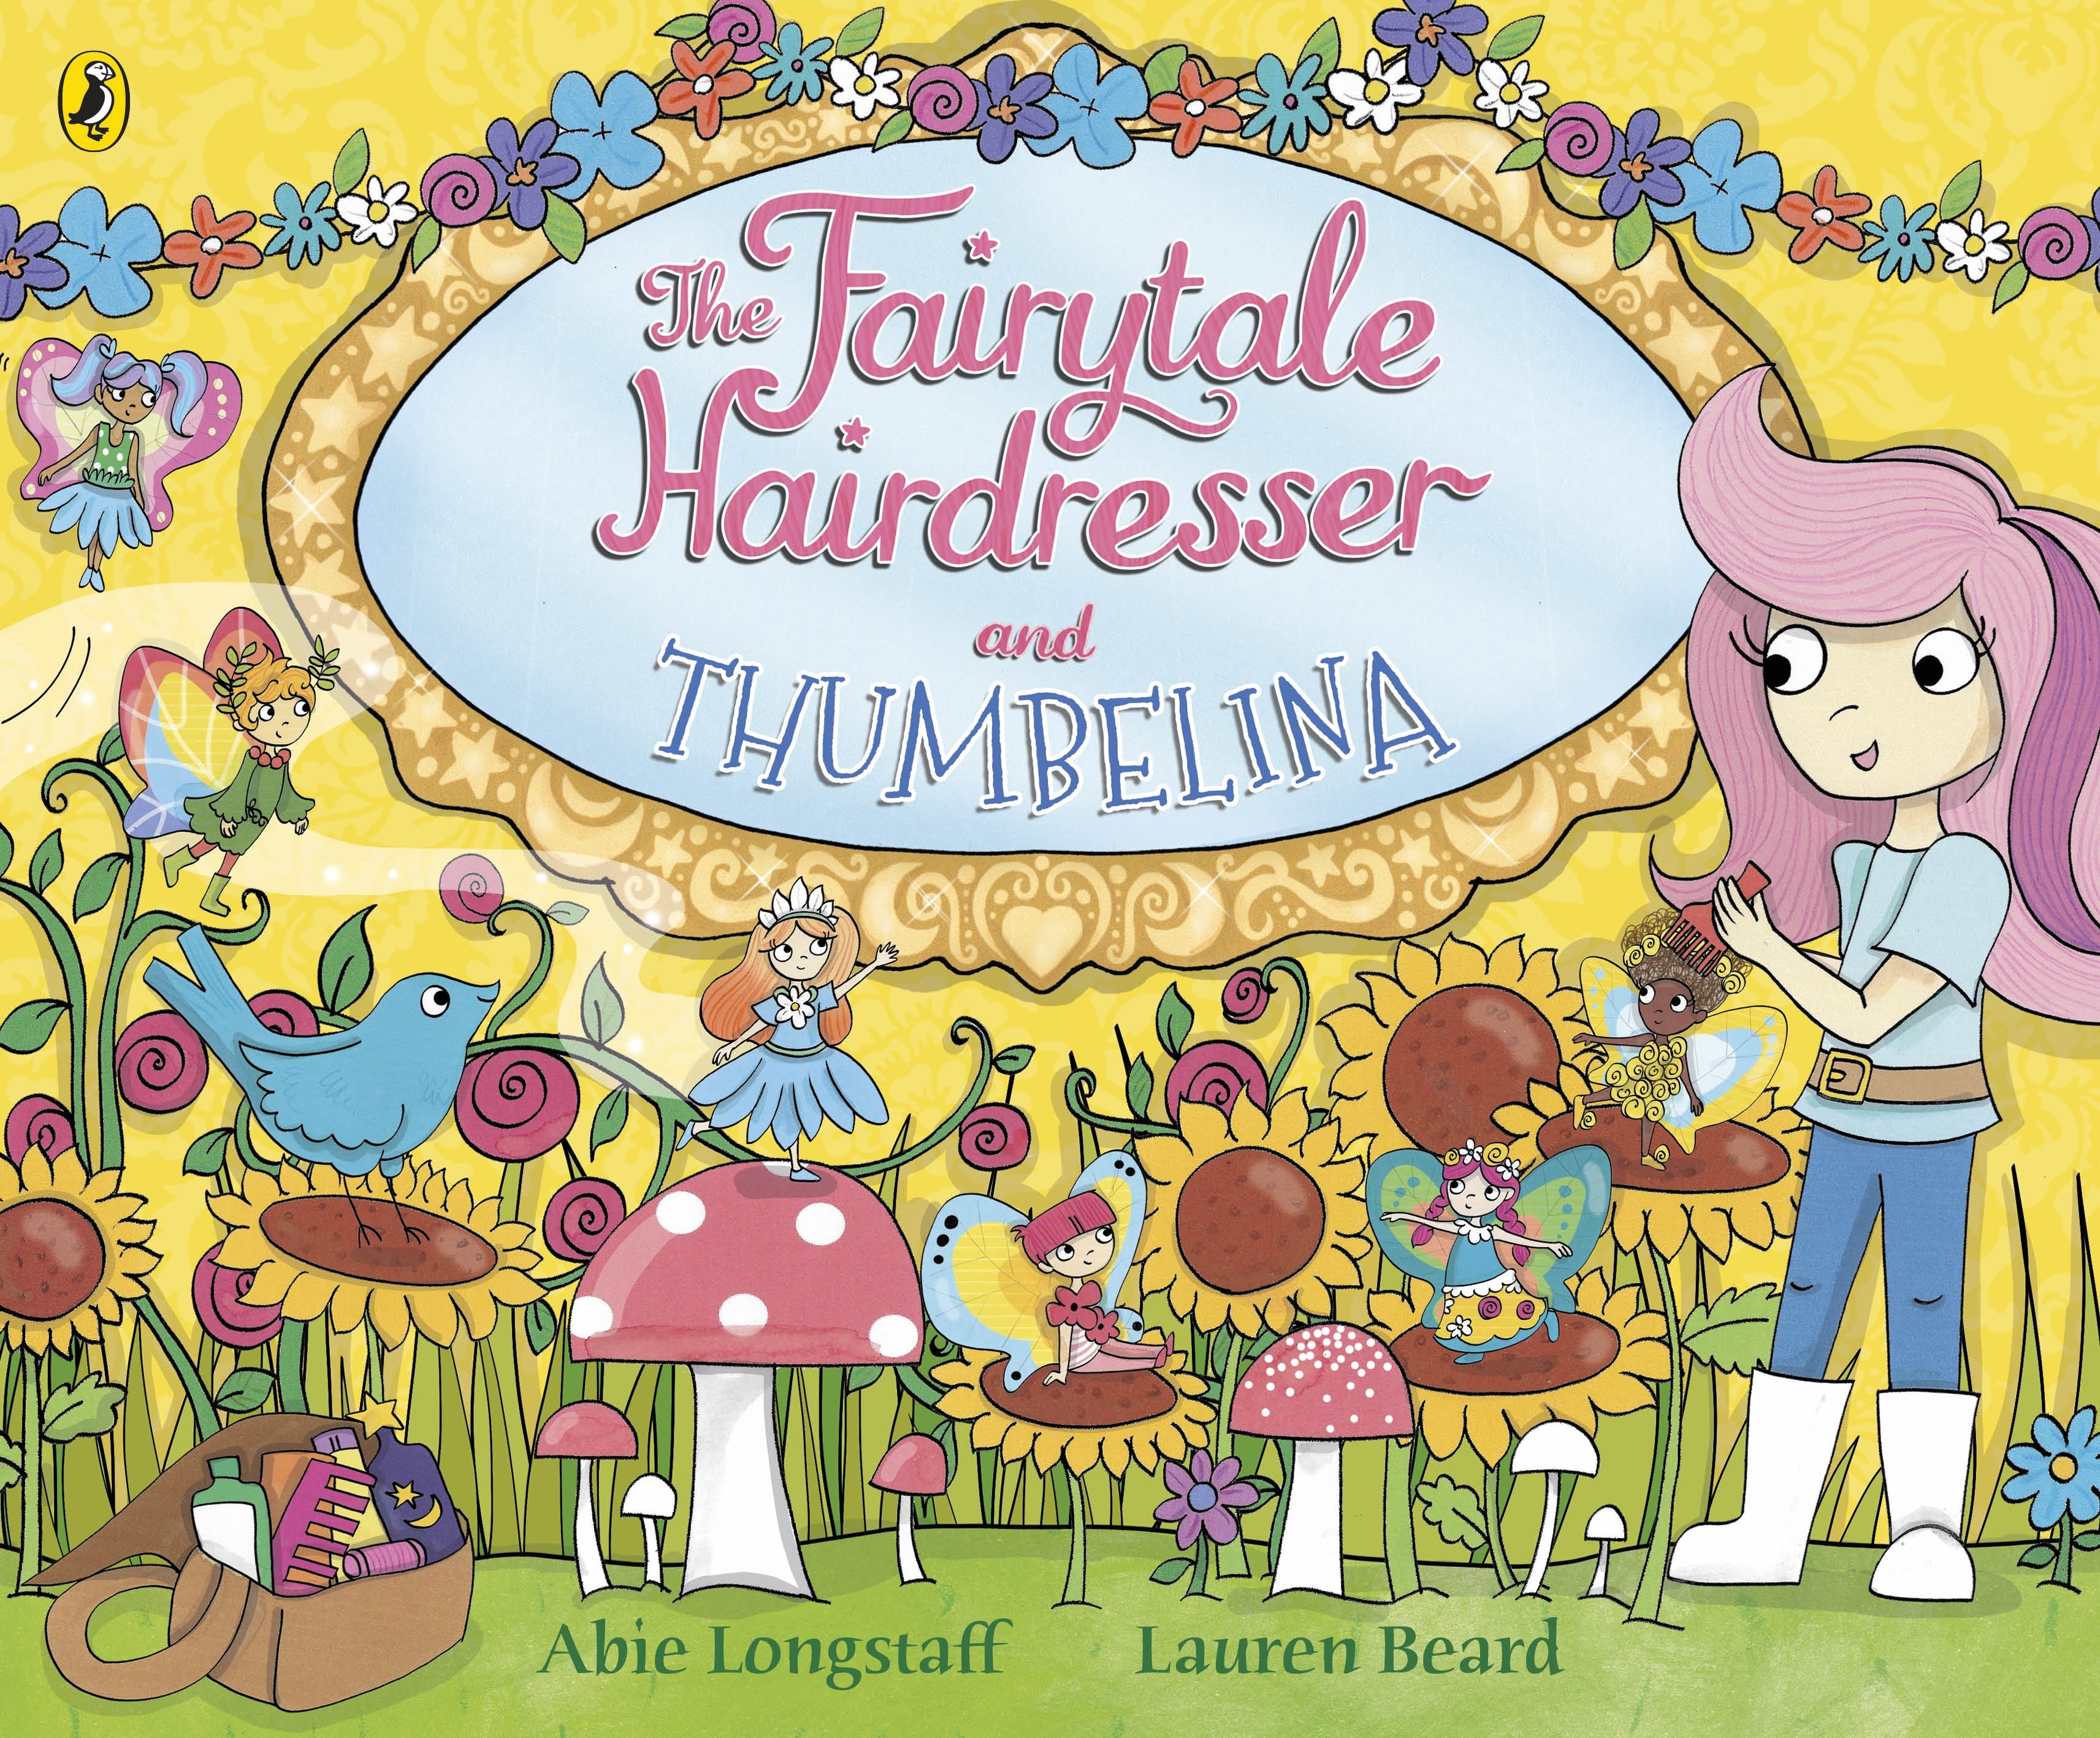 Book “The Fairytale Hairdresser and Thumbelina” by Abie Longstaff — August 8, 2019